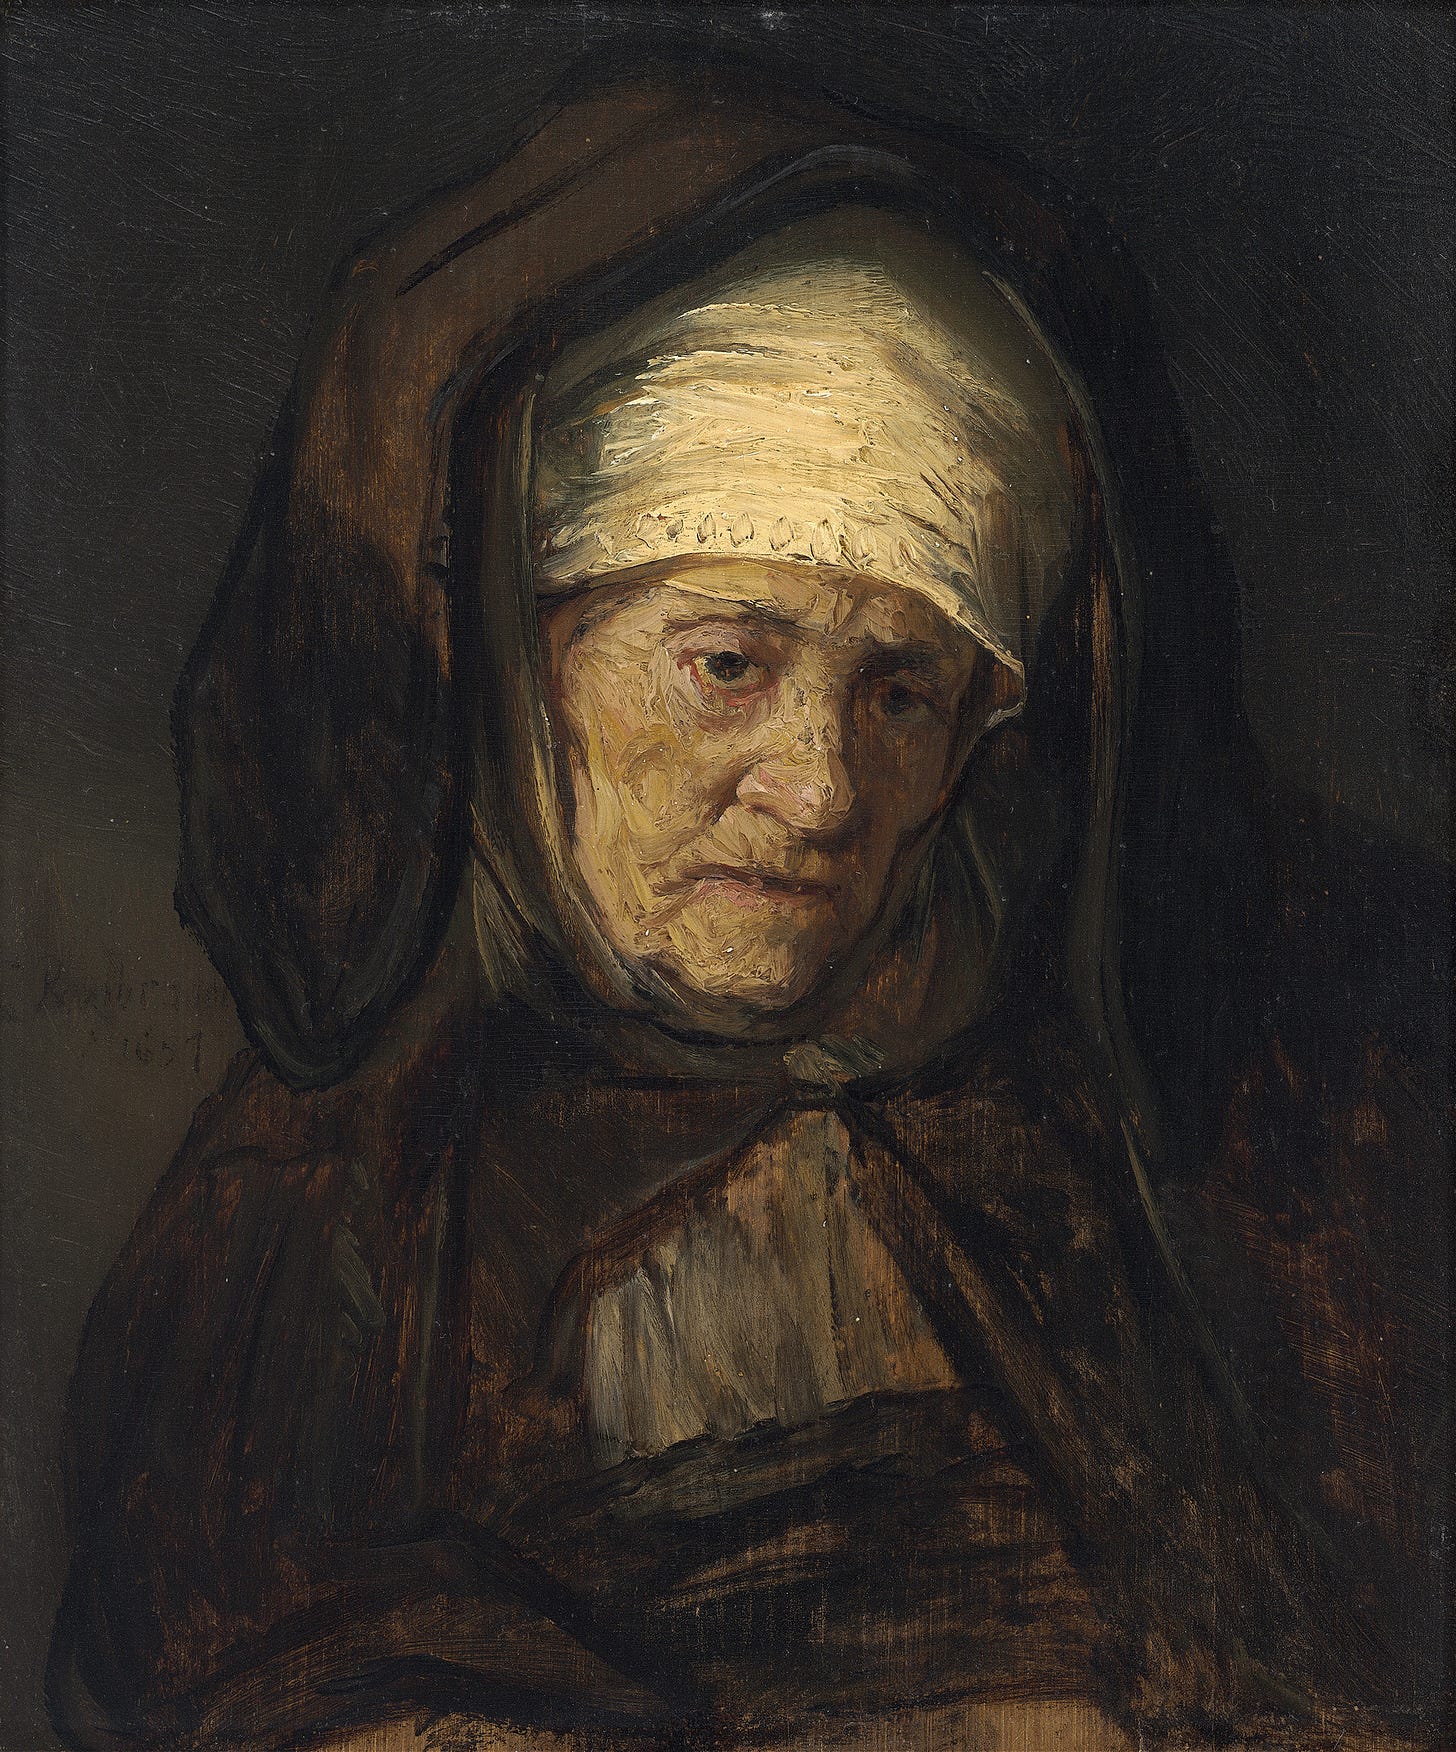 Head of an Aged Woman (1655-1660)by Rembrandt van Rijn